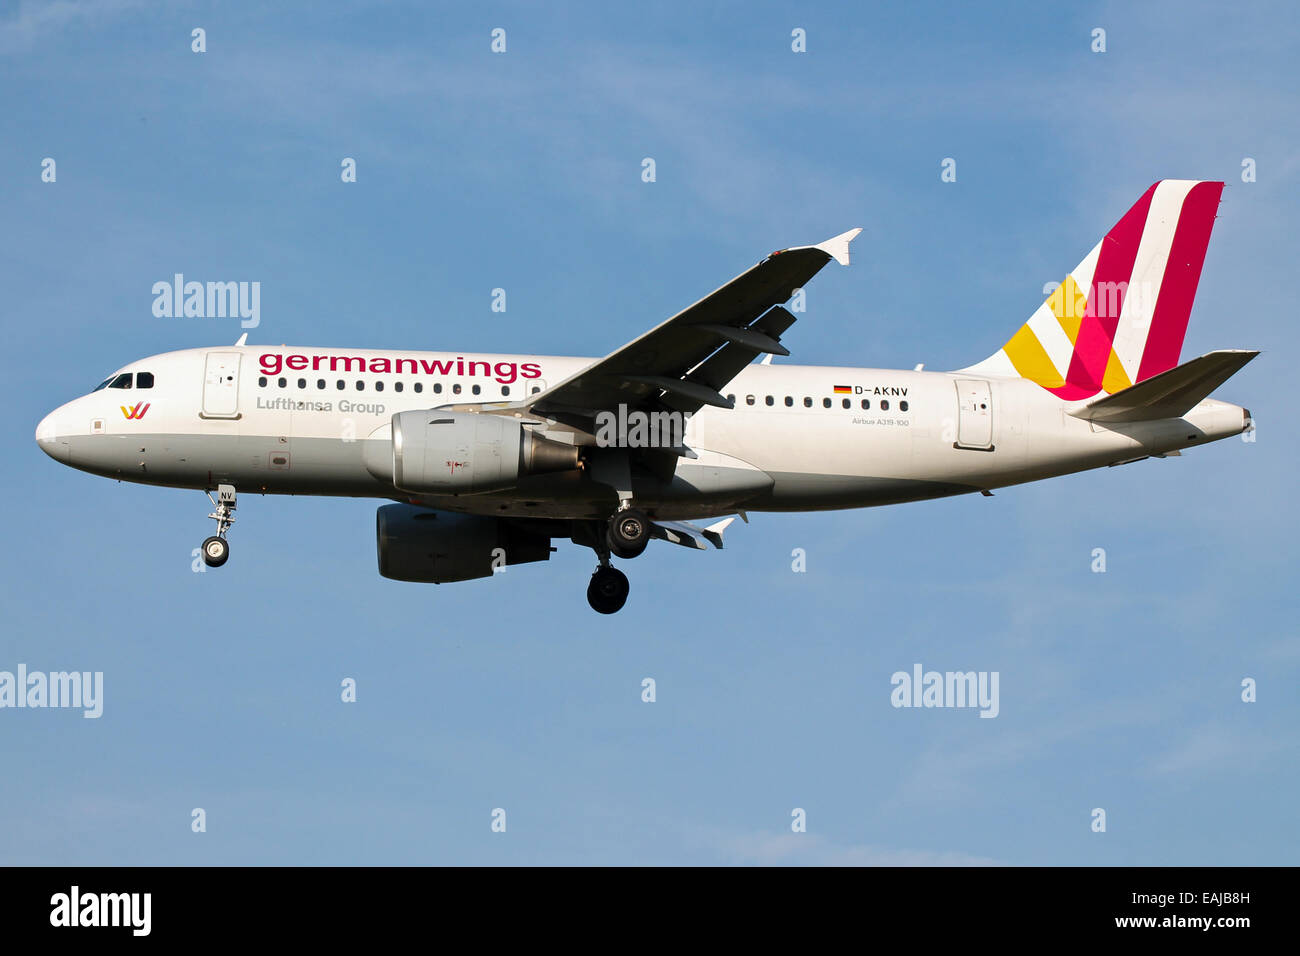 Germanwings Airbus A319 approaches runway 27L at London Heathrow Airport. Stock Photo